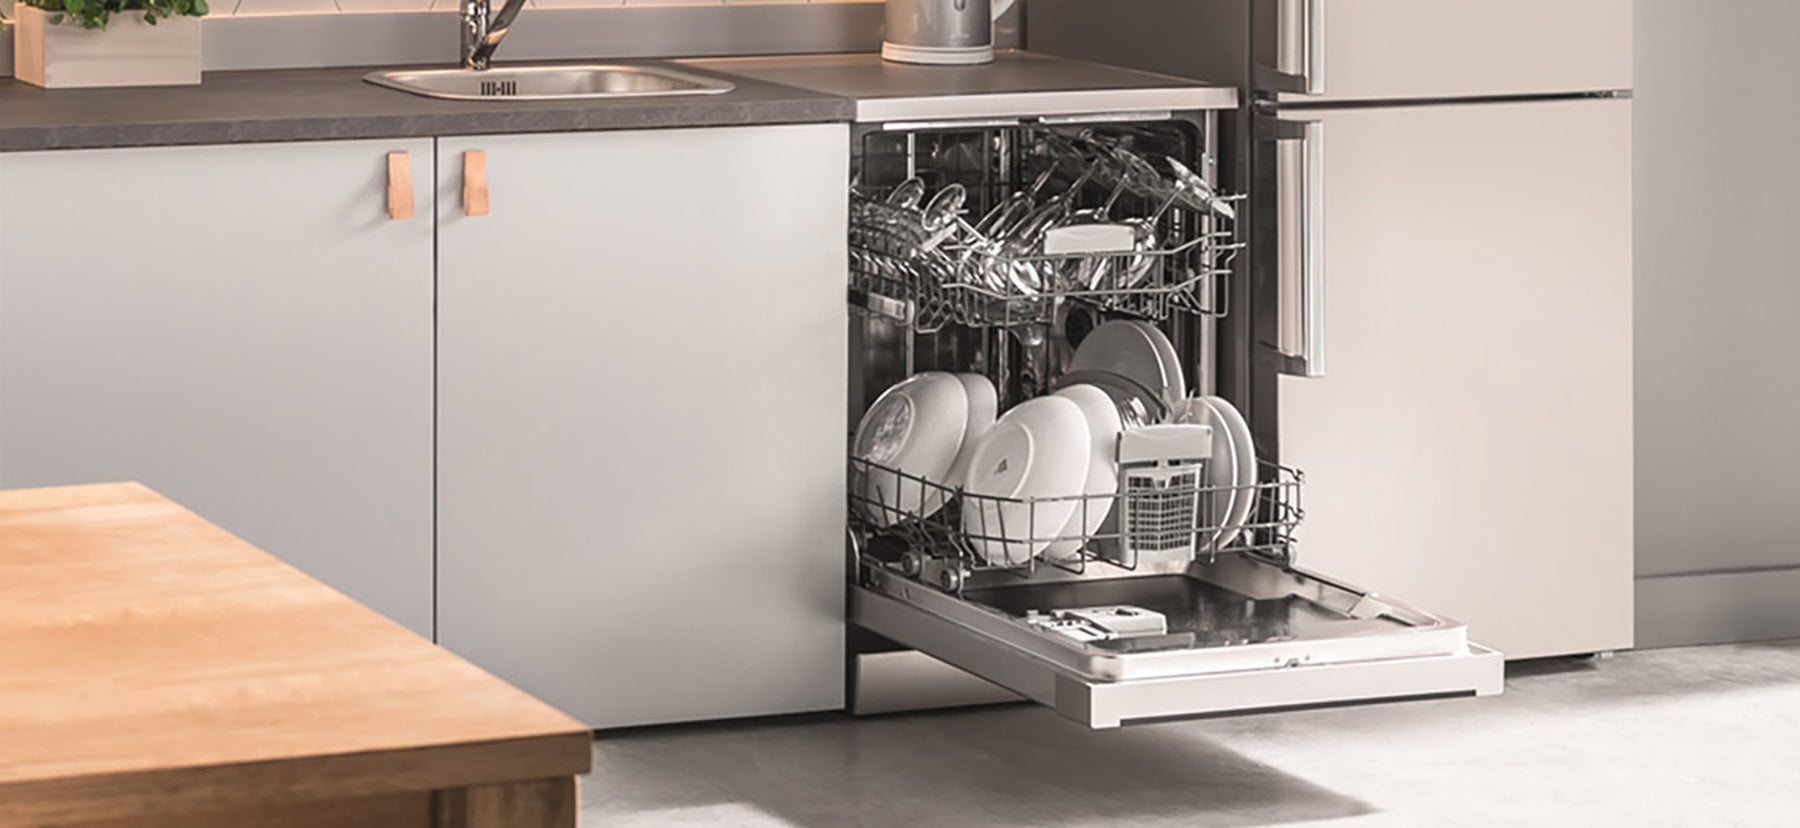 Exploring the most popular dishwasher brands in New Zealand